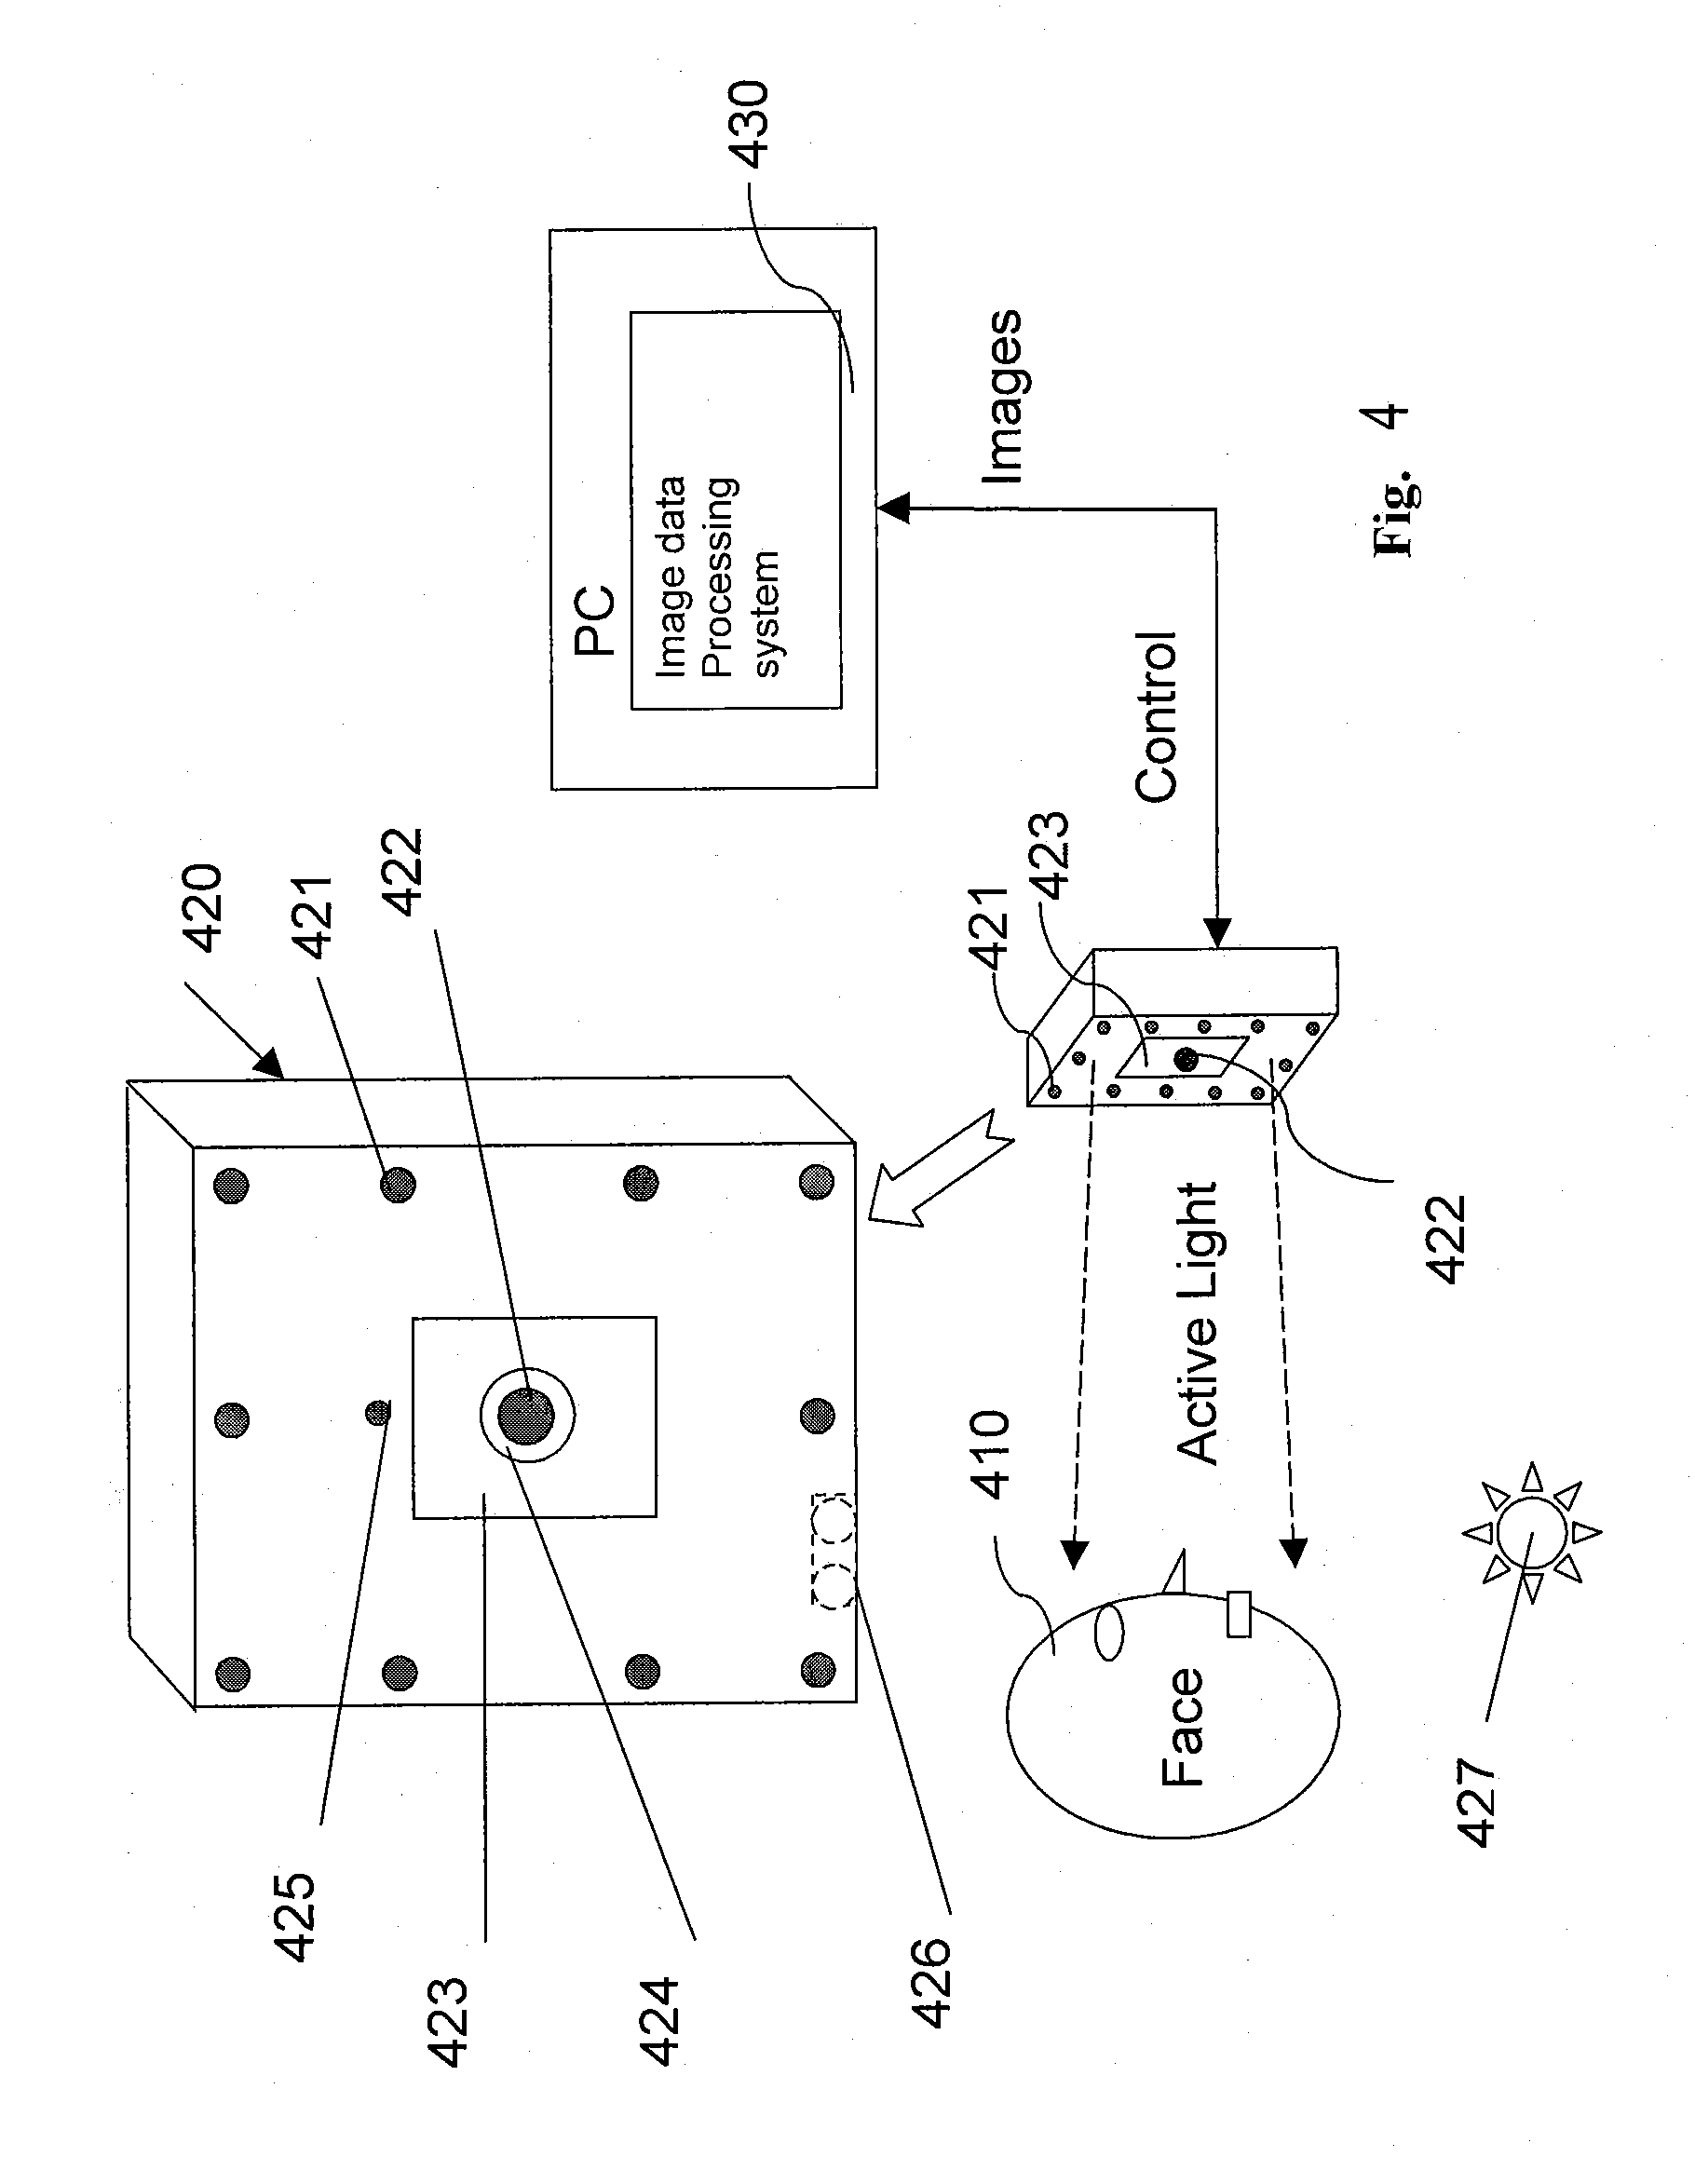 Method and Apparatus For Facial Image Acquisition and Recognition